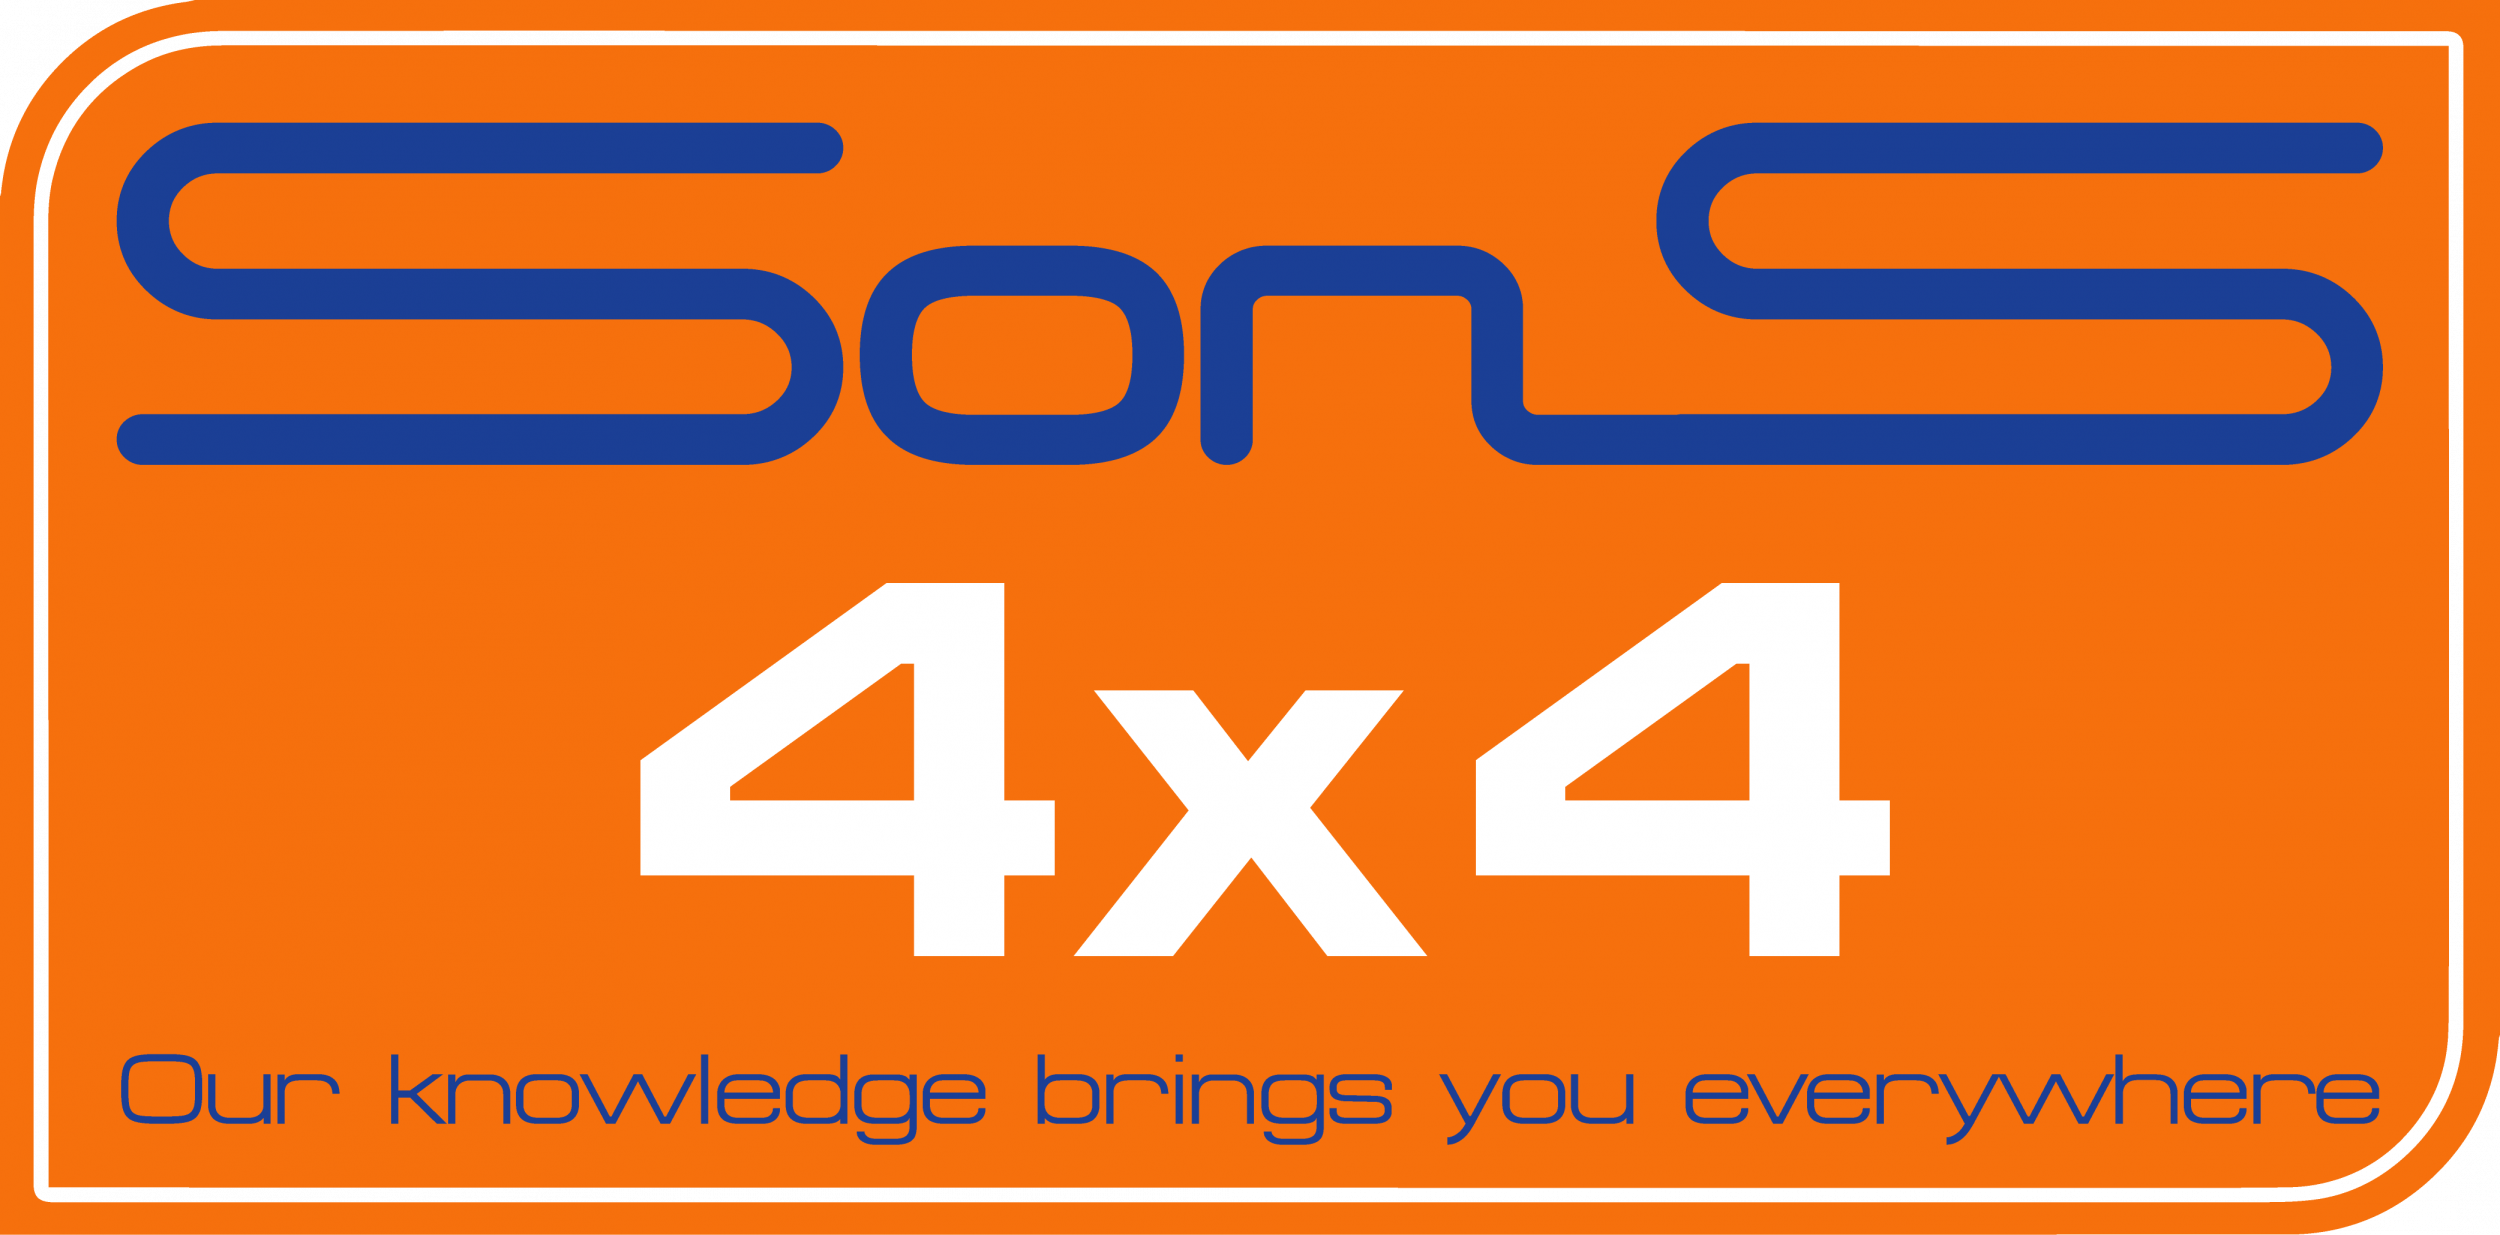 Sons4x4
